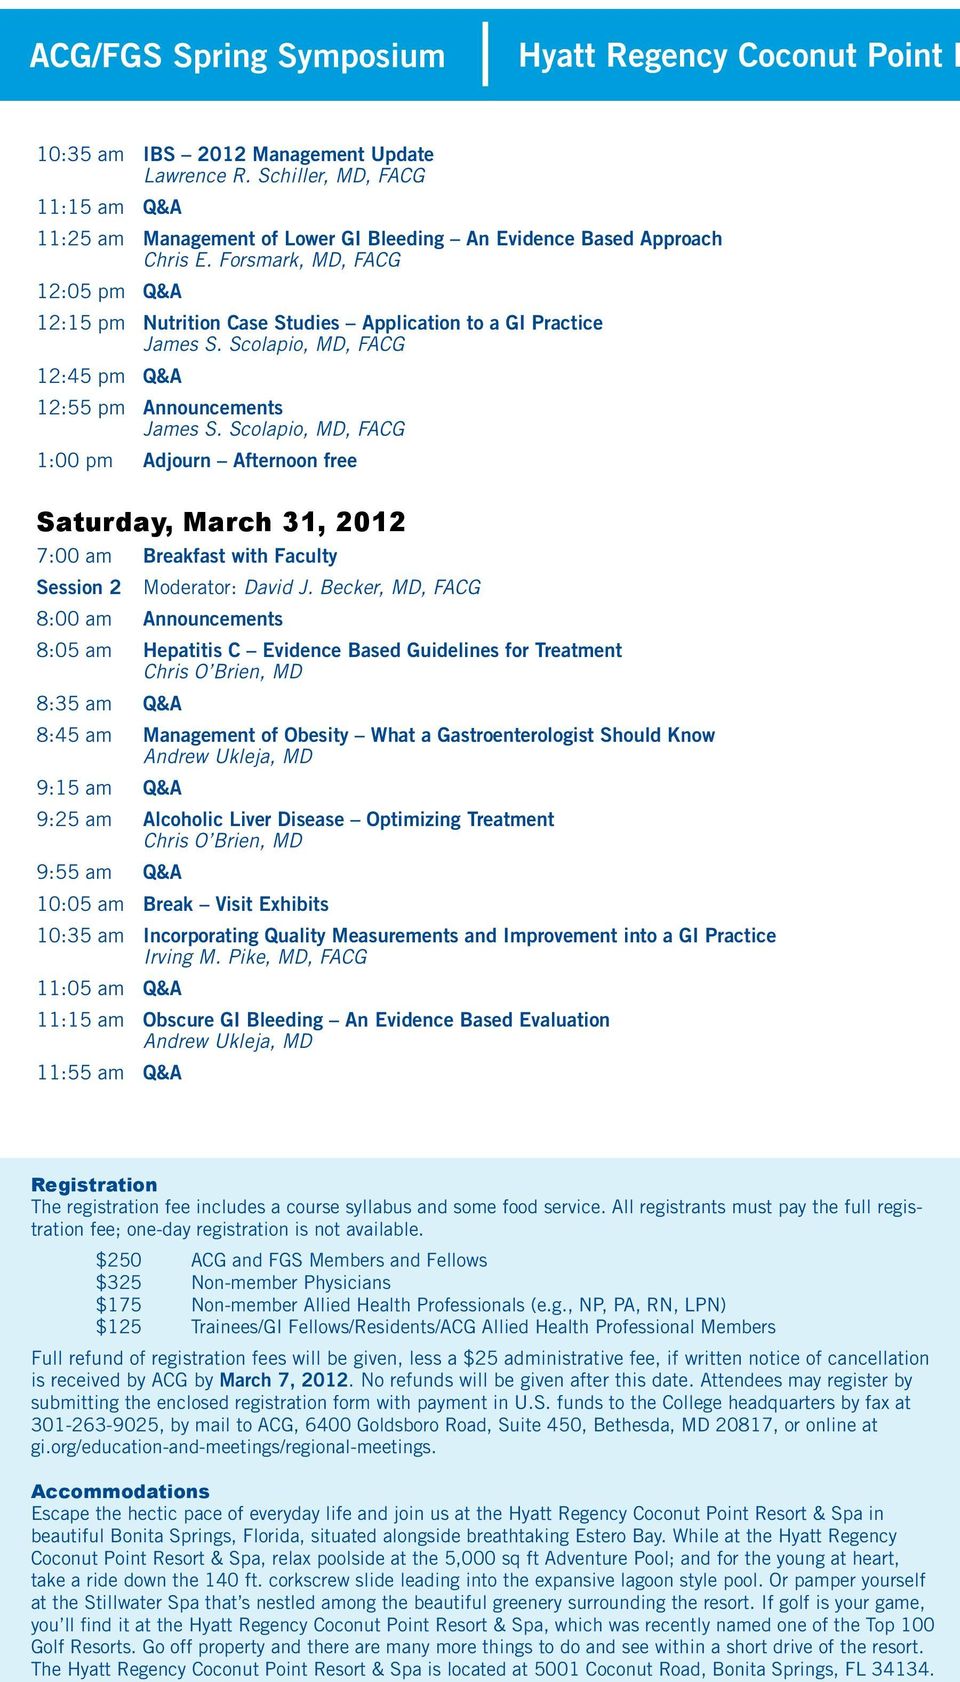 Forsmark, MD, FACG 12:05 pm Q&A 12:15 pm Nutrition Case Studies Application to a GI Practice 12:45 pm Q&A 12:55 pm Announcements 1:00 pm Adjourn Afternoon free Saturday, March 31, 2012 7:00 am